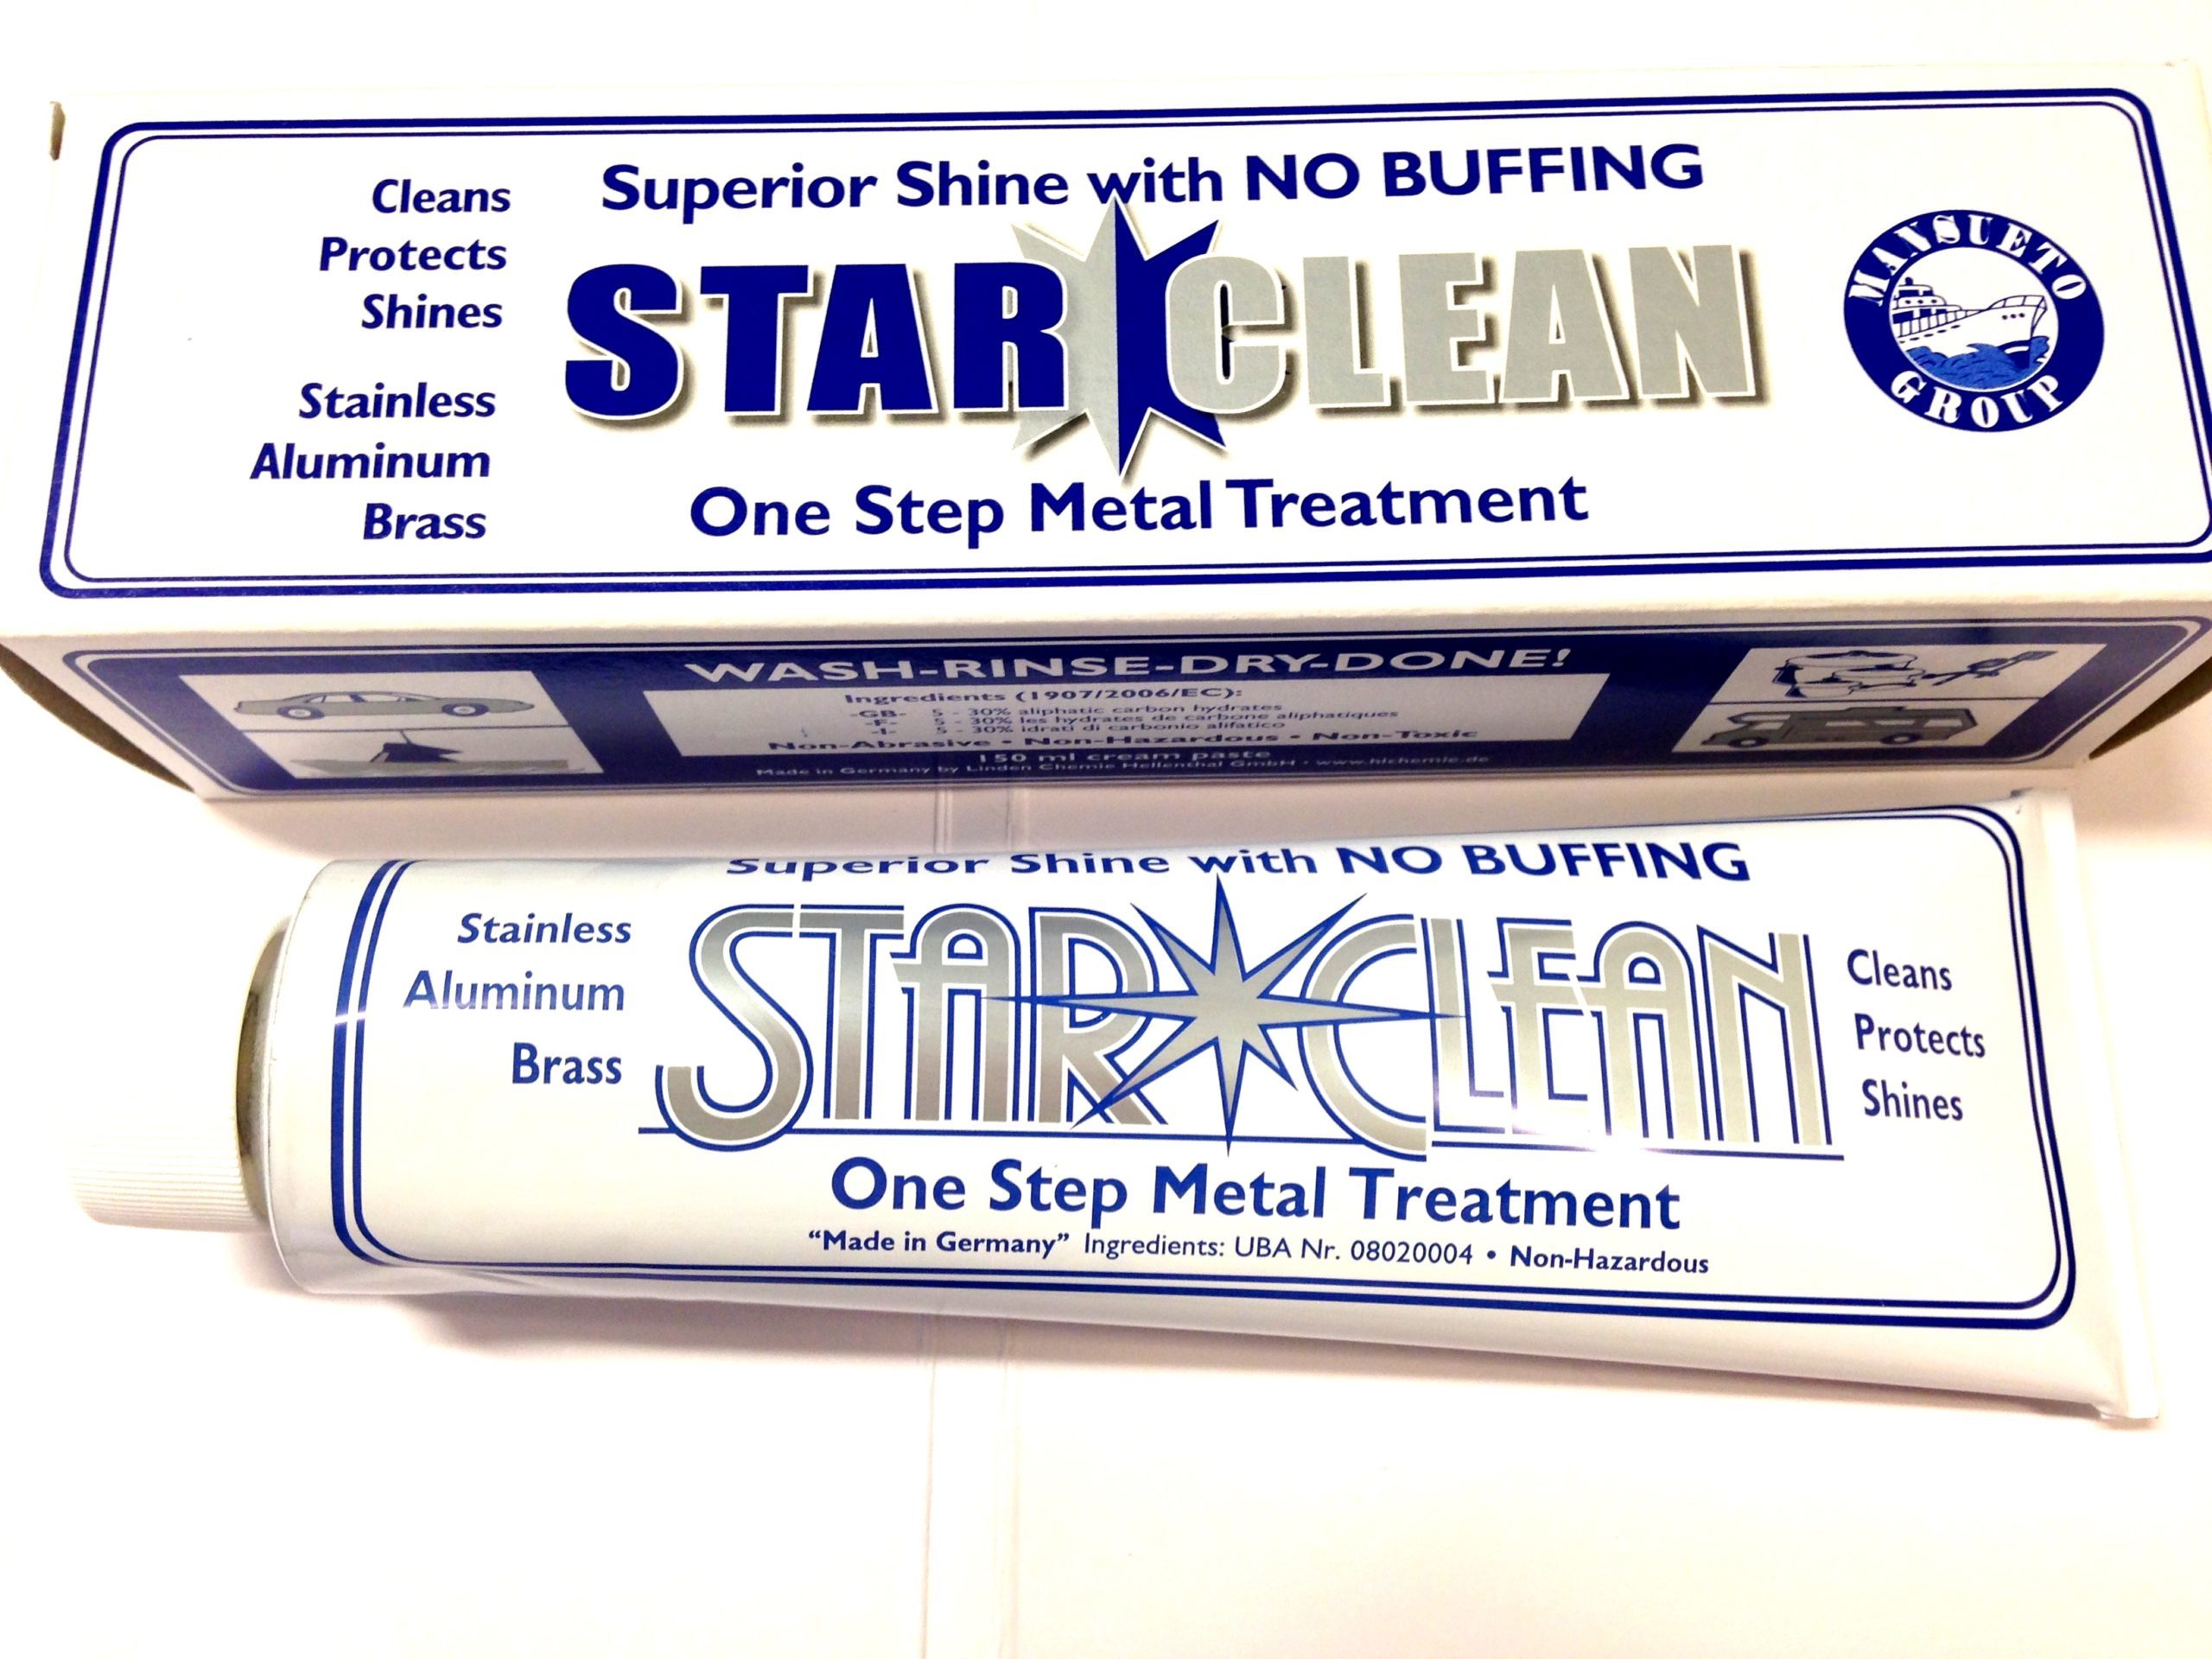 Star Clean one step metal treatment product